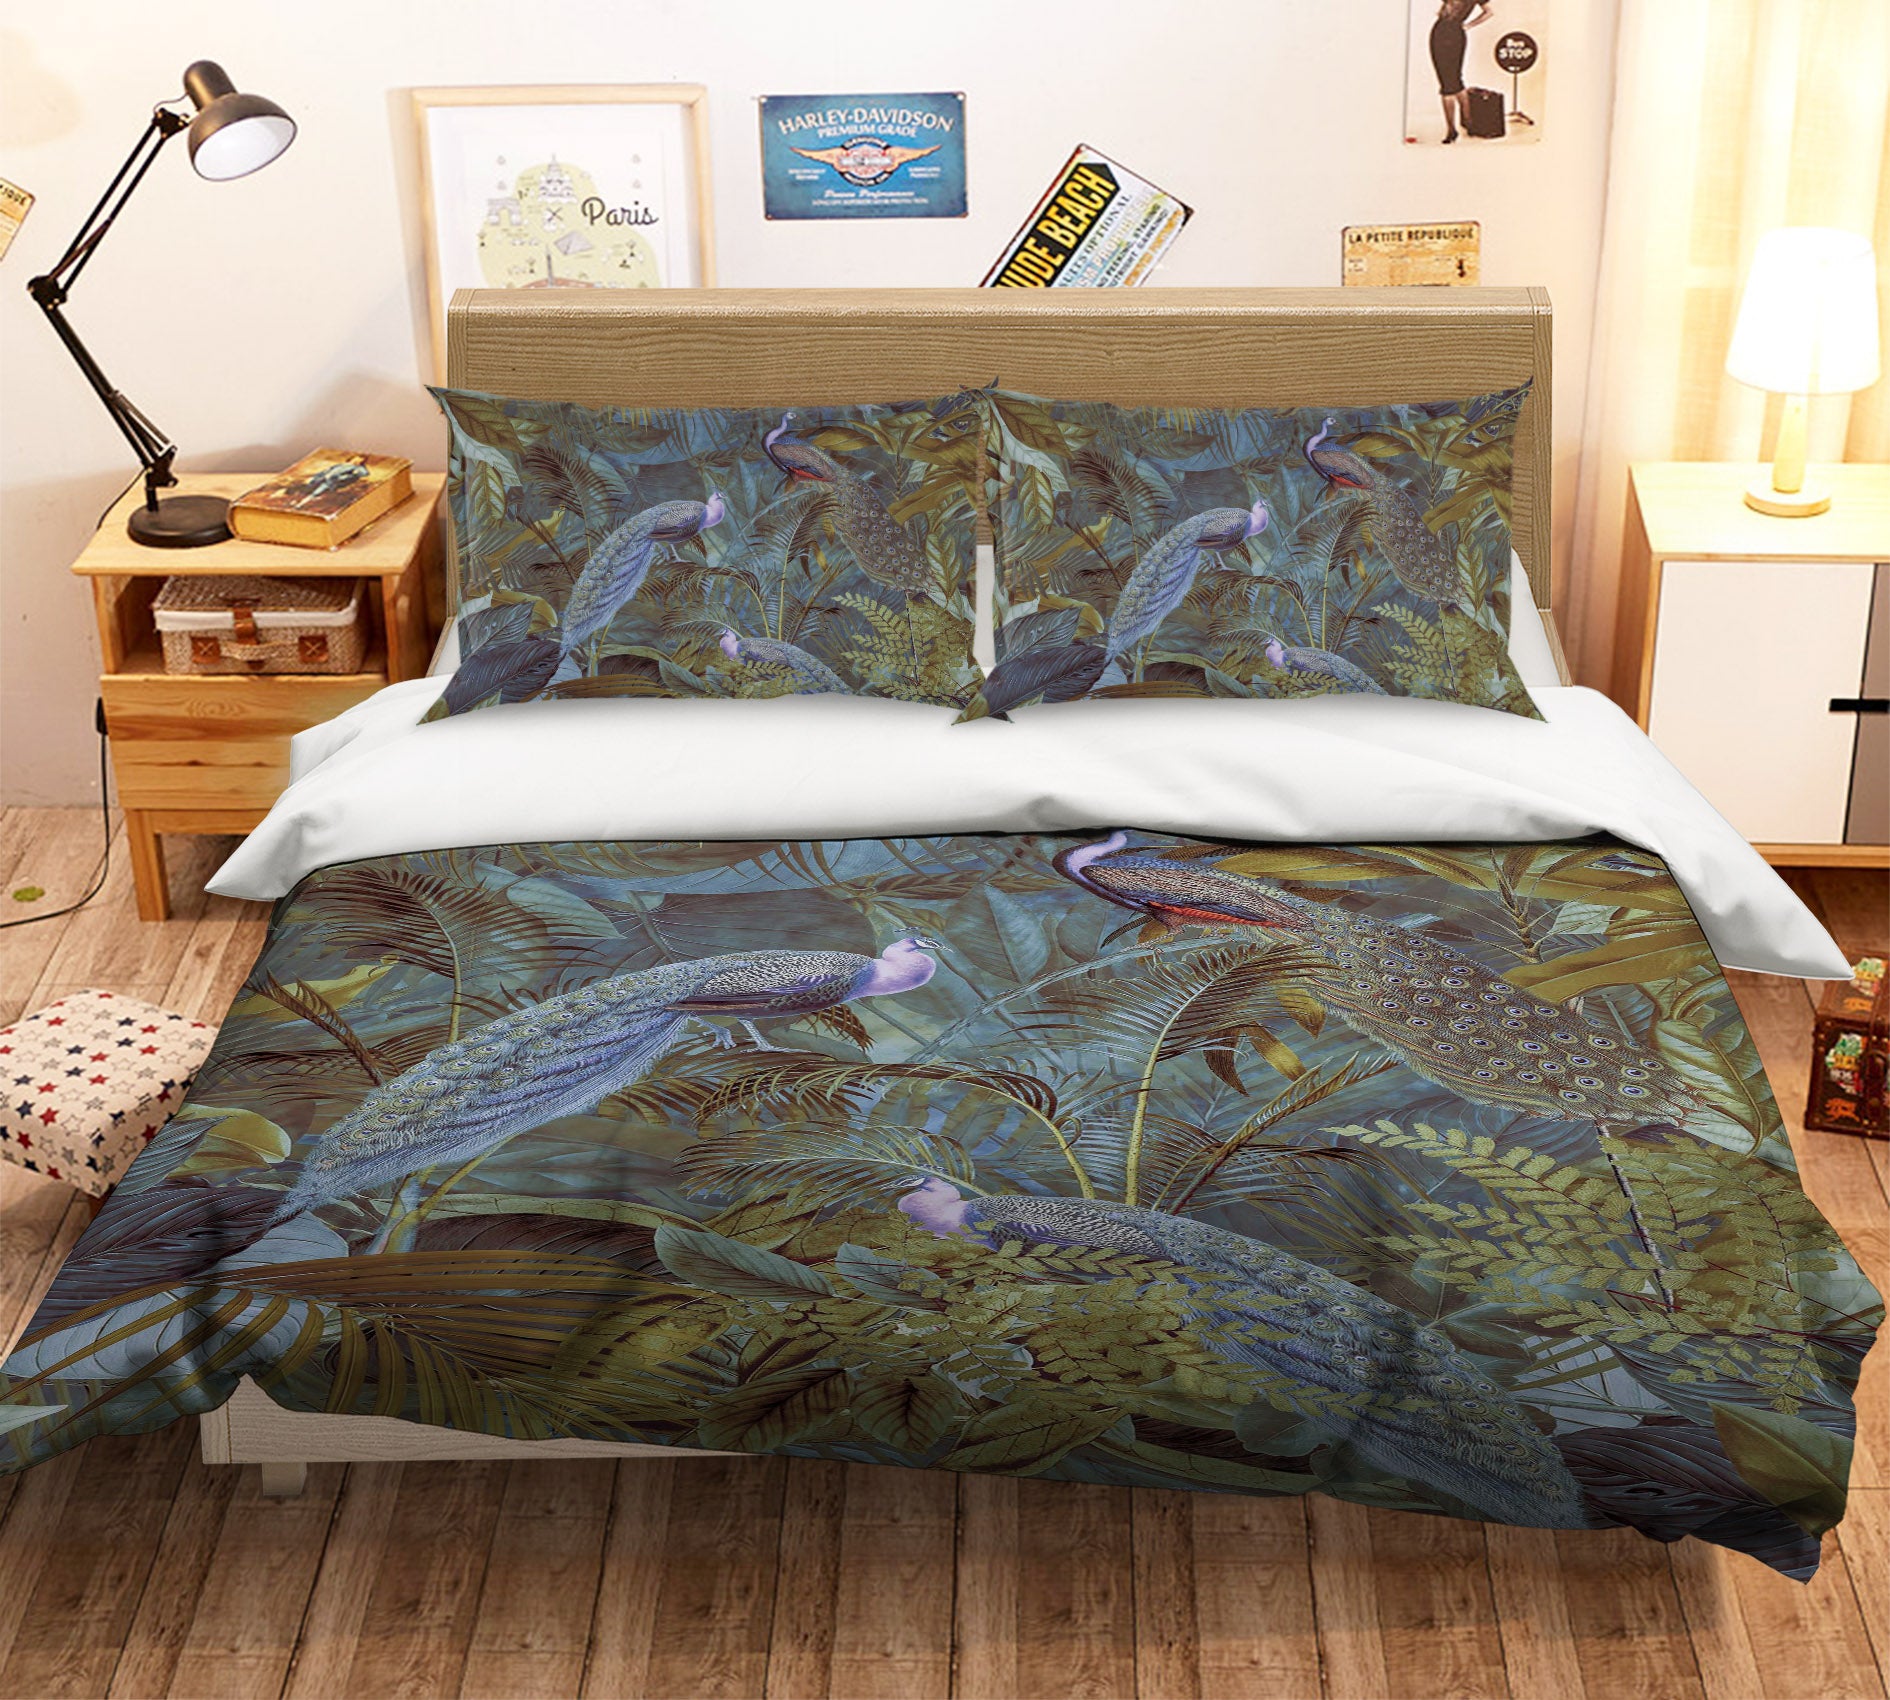 3D Night Peacock 114 Andrea haase Bedding Bed Pillowcases Quilt